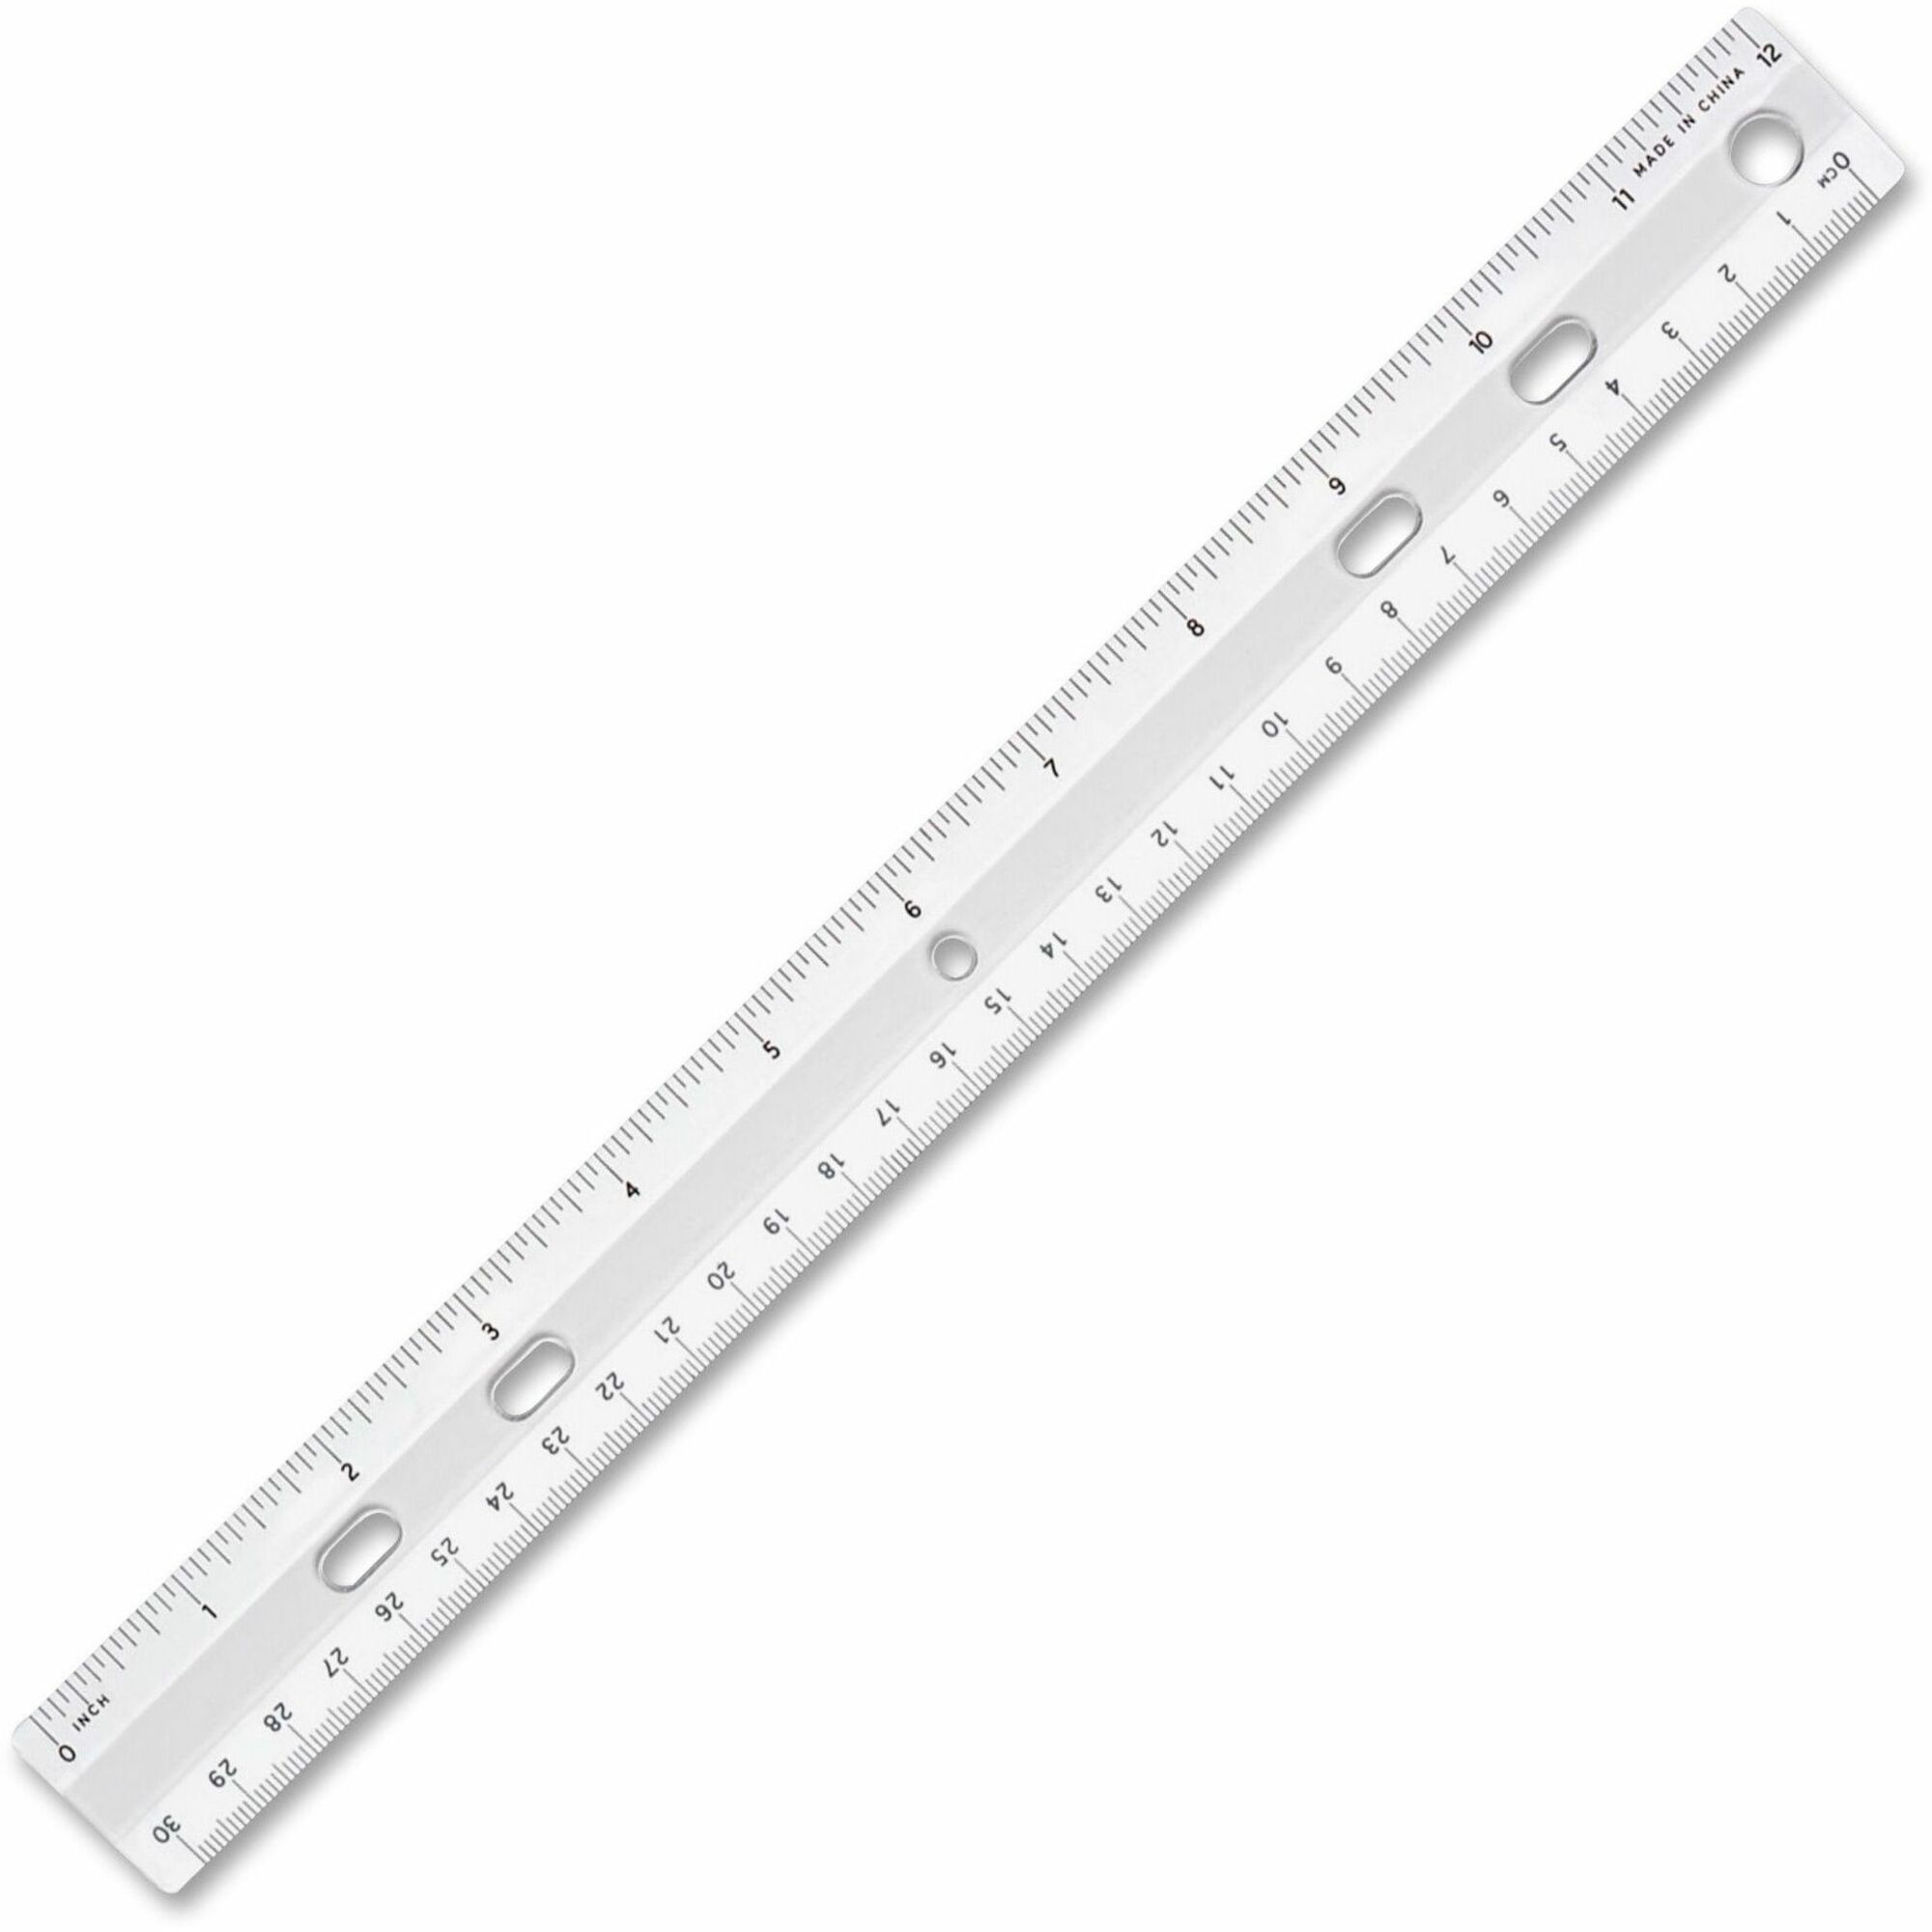 Print Out A Metric Ruler